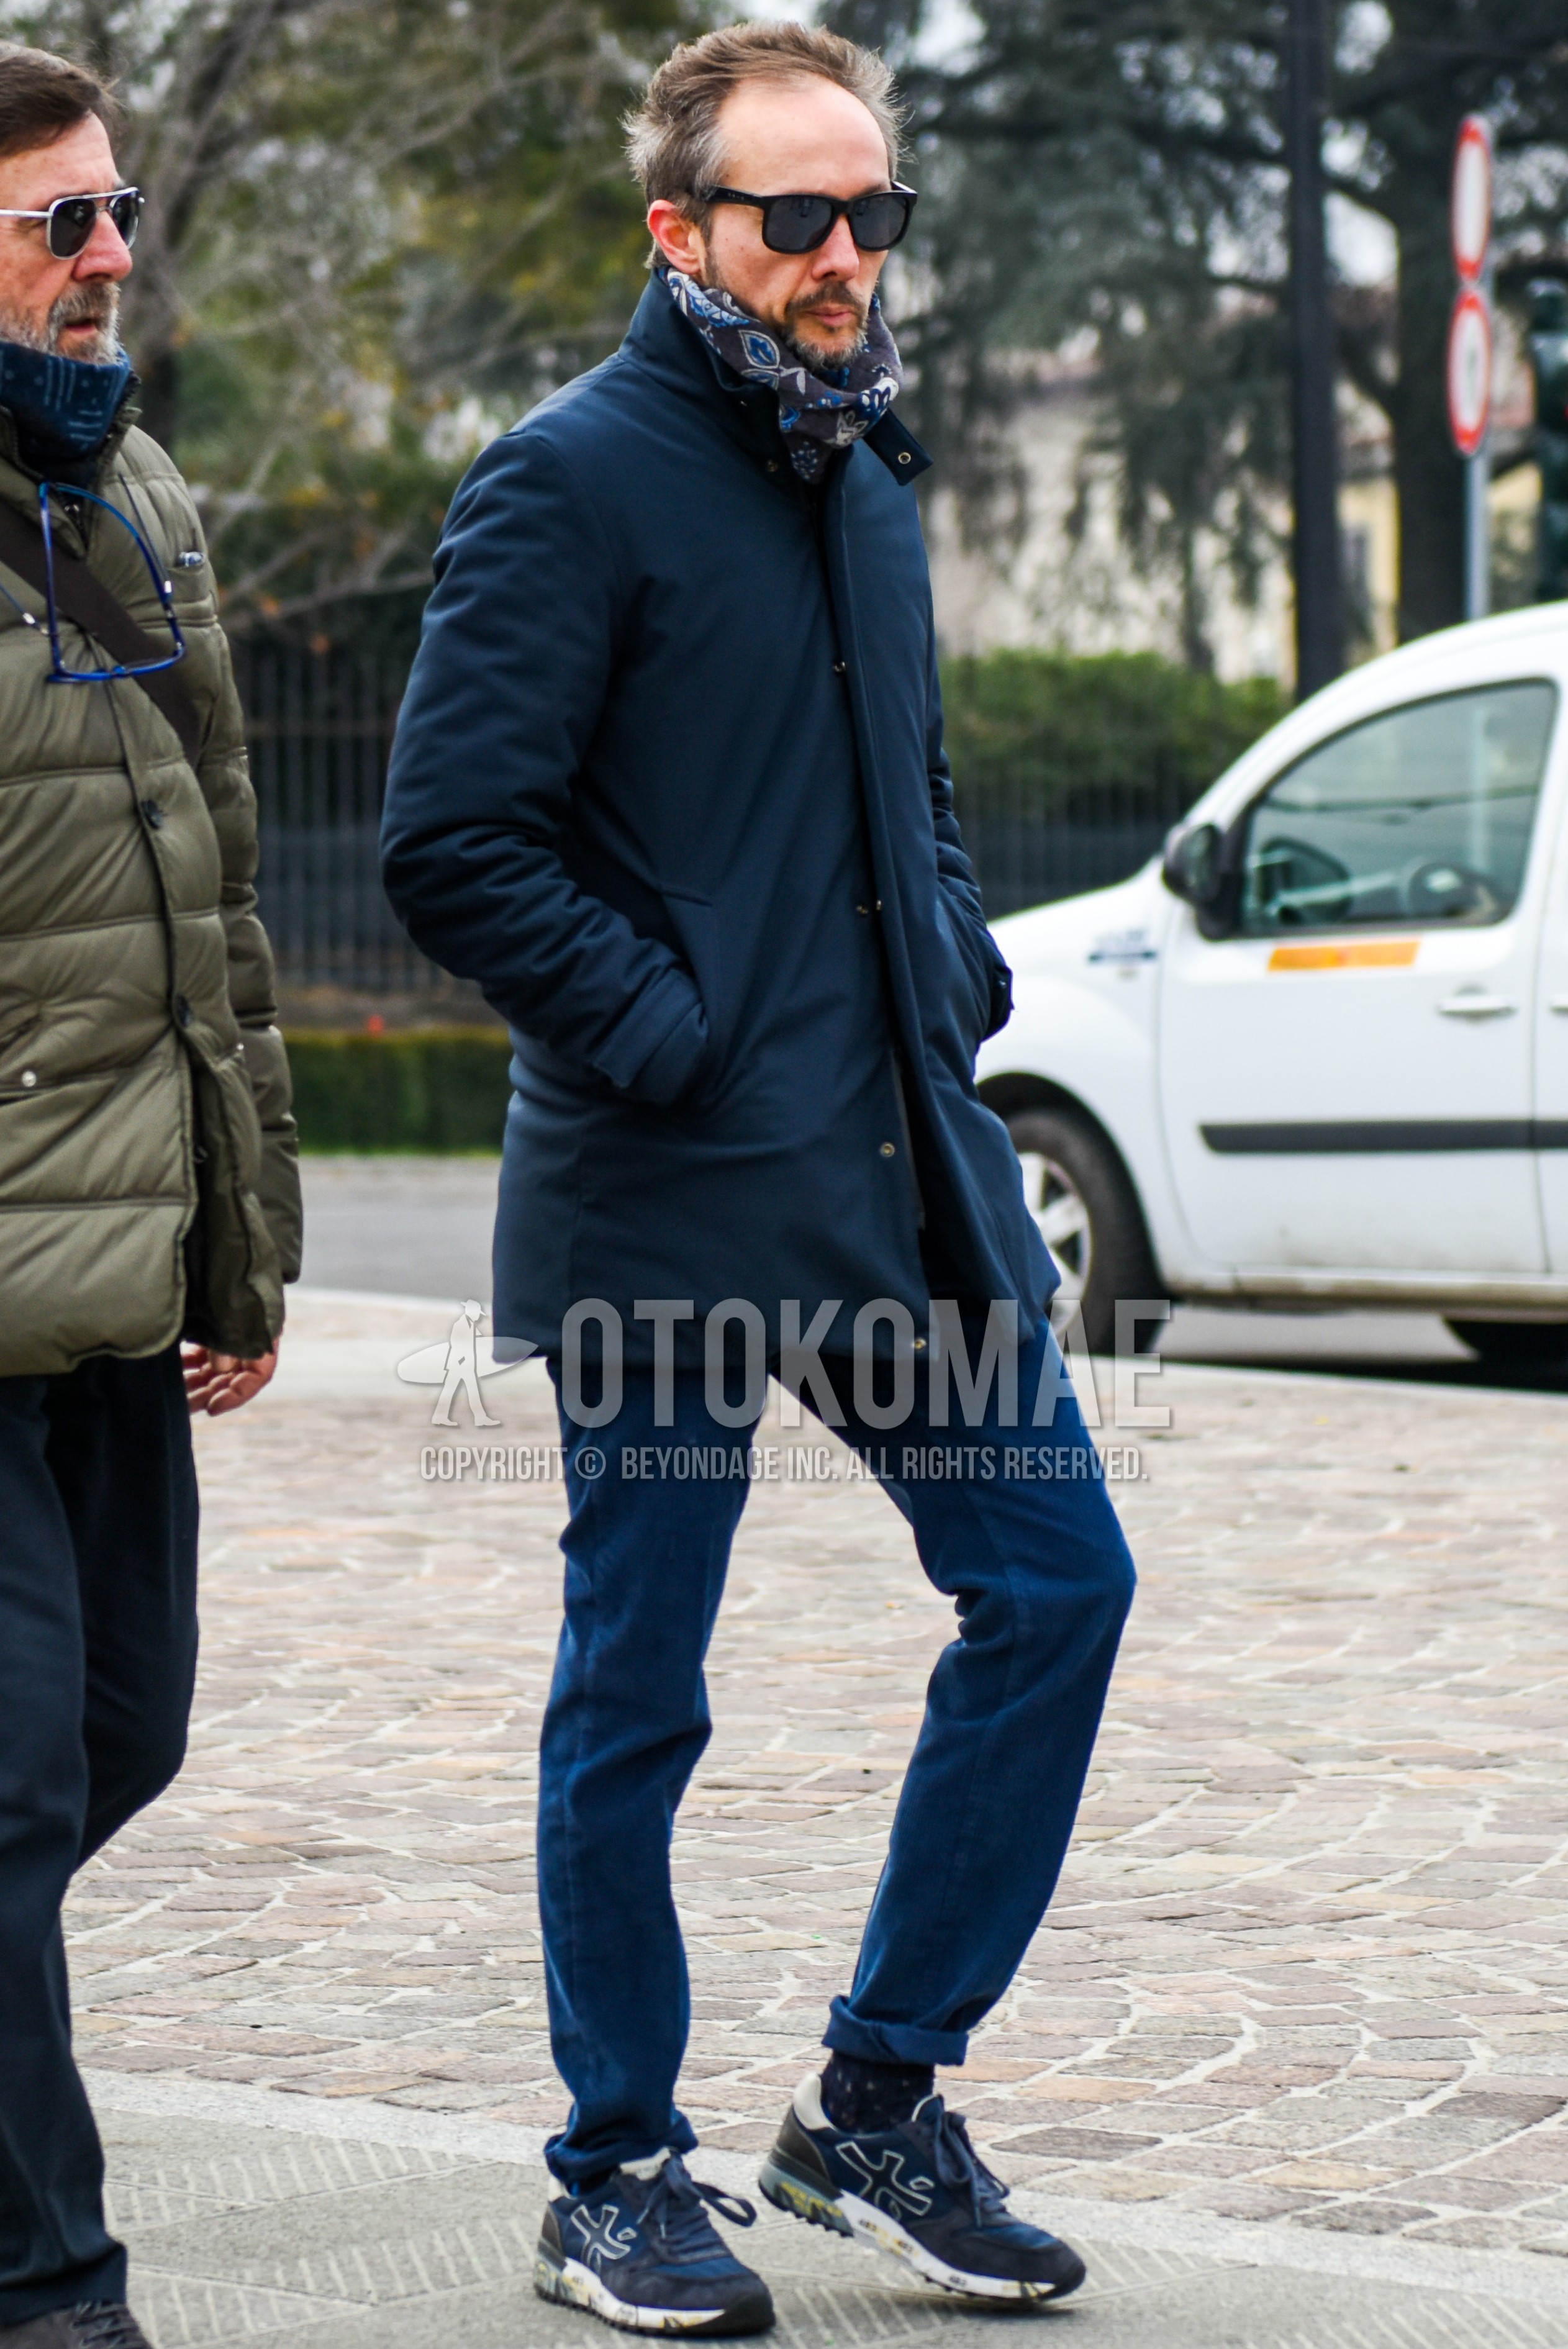 Men's autumn winter outfit with black plain sunglasses, brown scarf scarf, navy plain stenkarrer coat, navy plain chinos, black socks socks, navy low-cut sneakers.